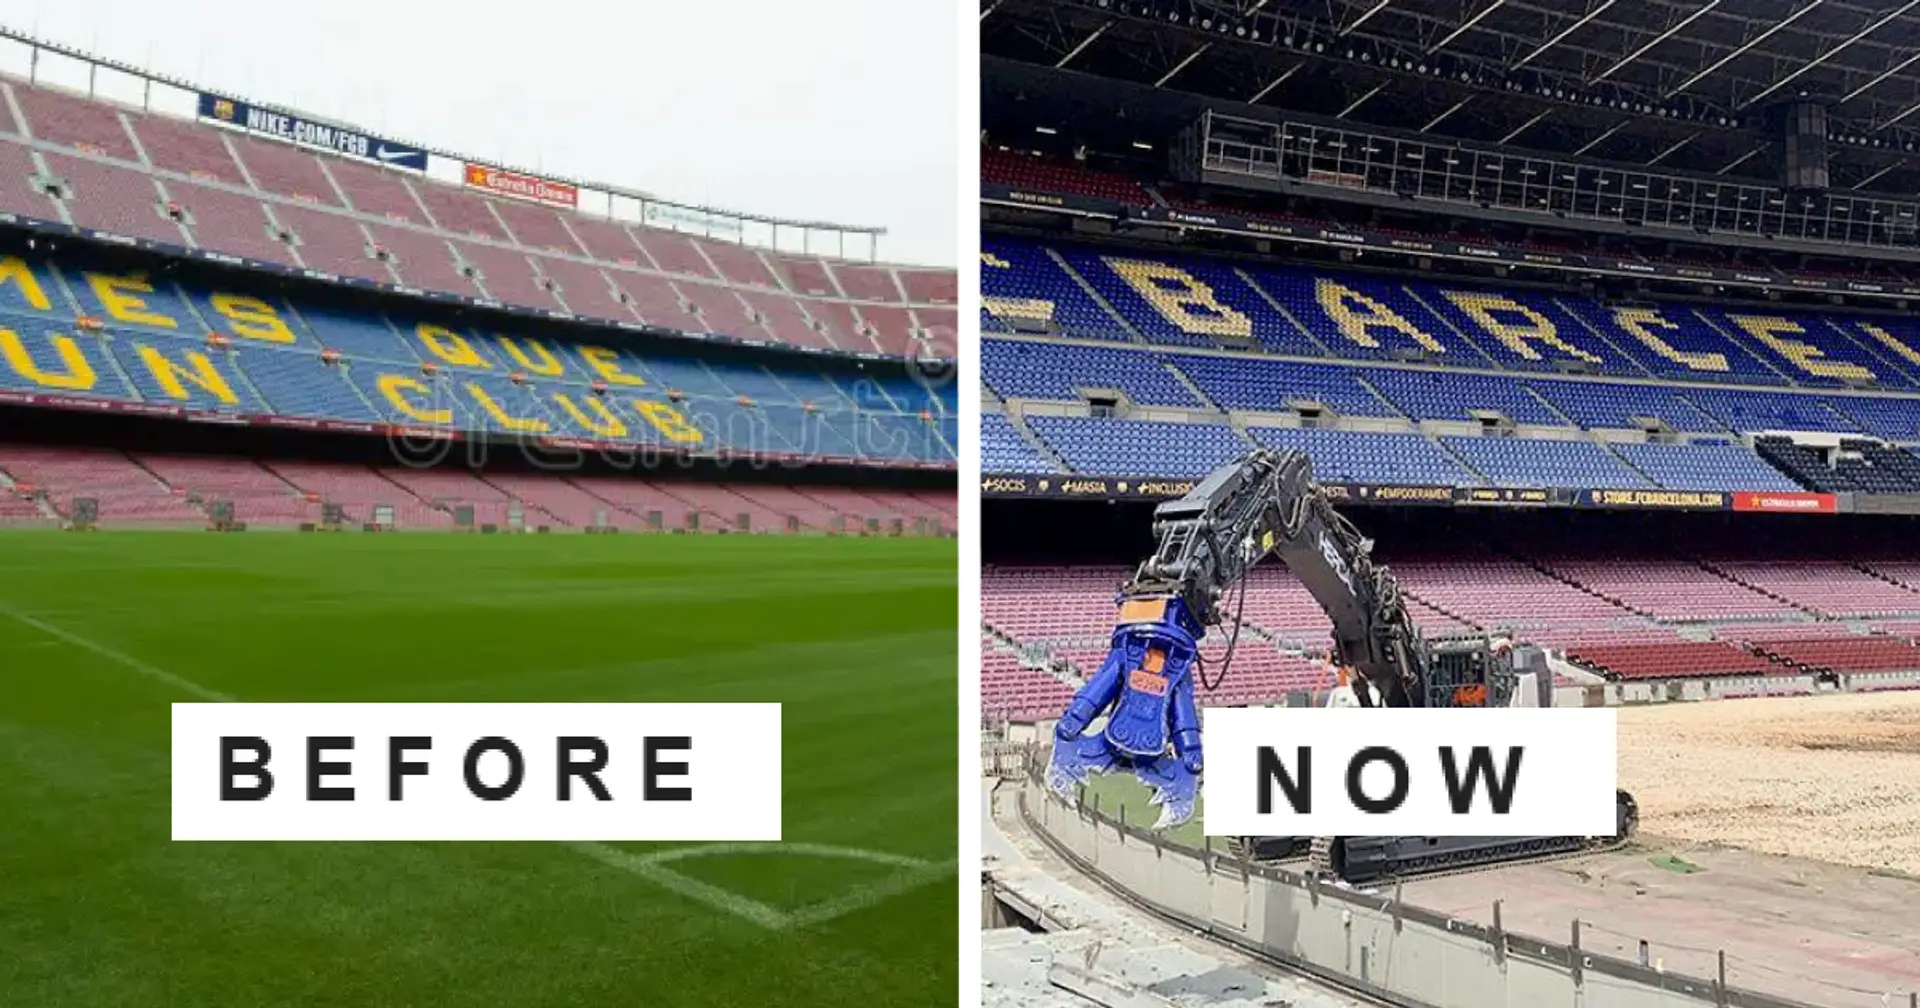 NEW: Images of Camp Nou under serious construction emerge